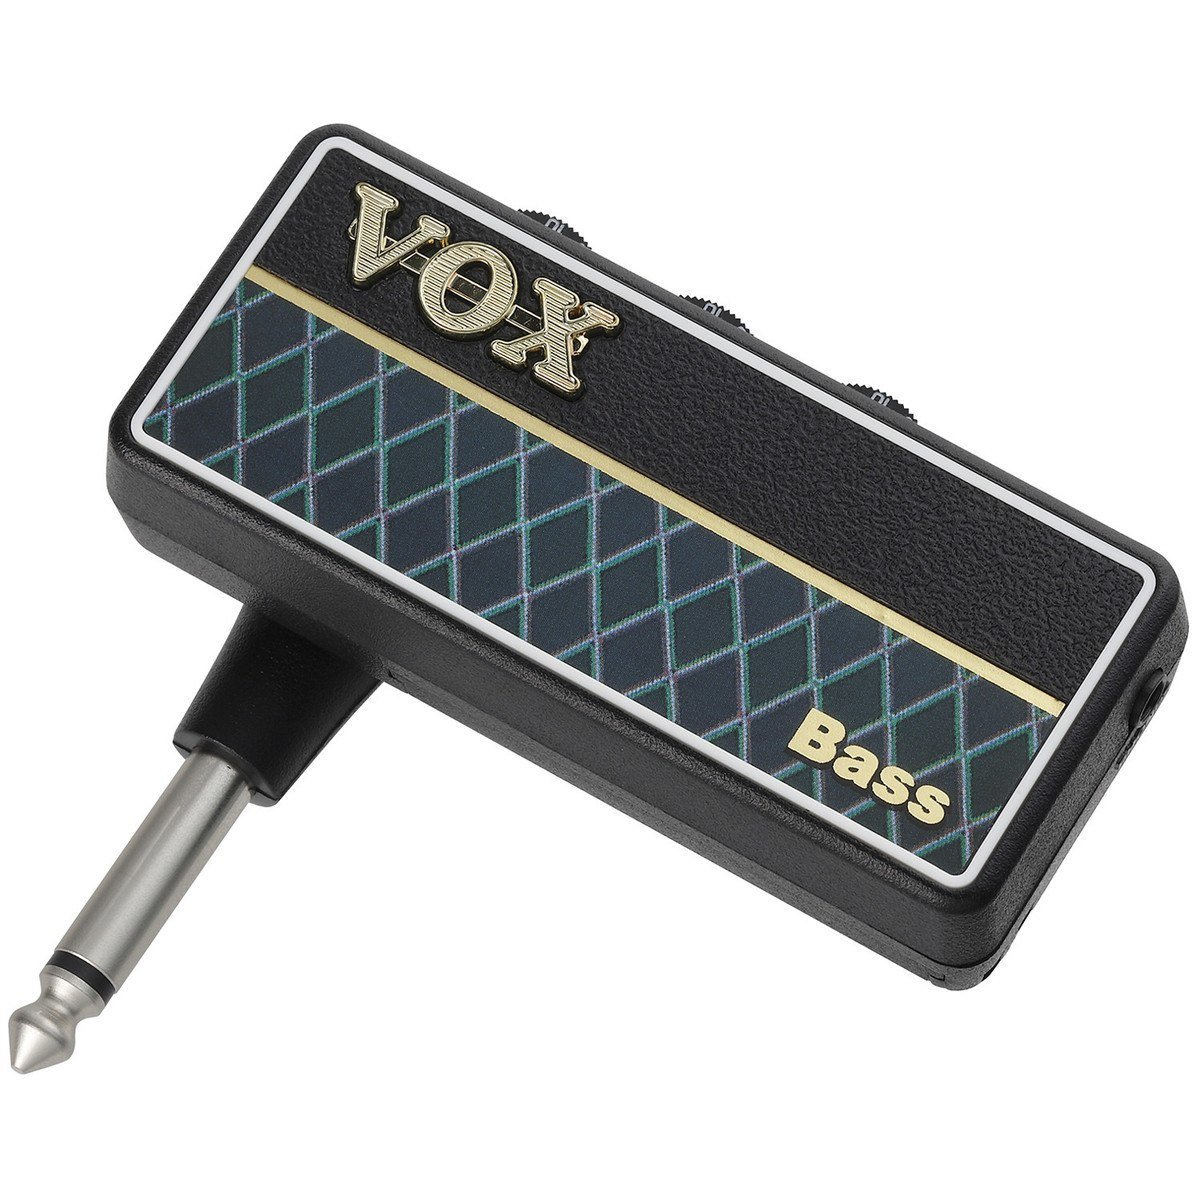 vox amps review